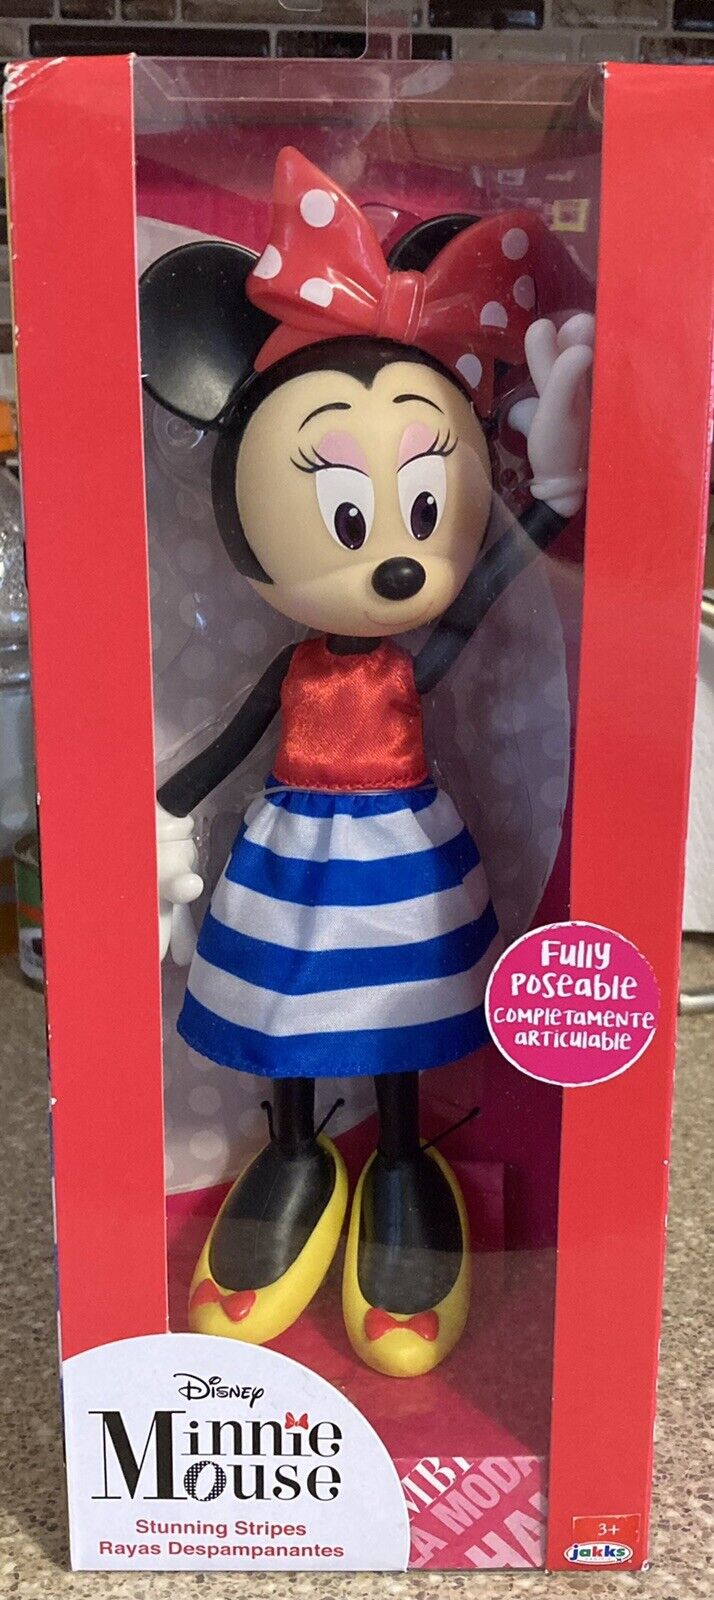 Disney Minnie Mouse Fully Poseable Stunning Stripes Red/white/blue 9" Doll Nib